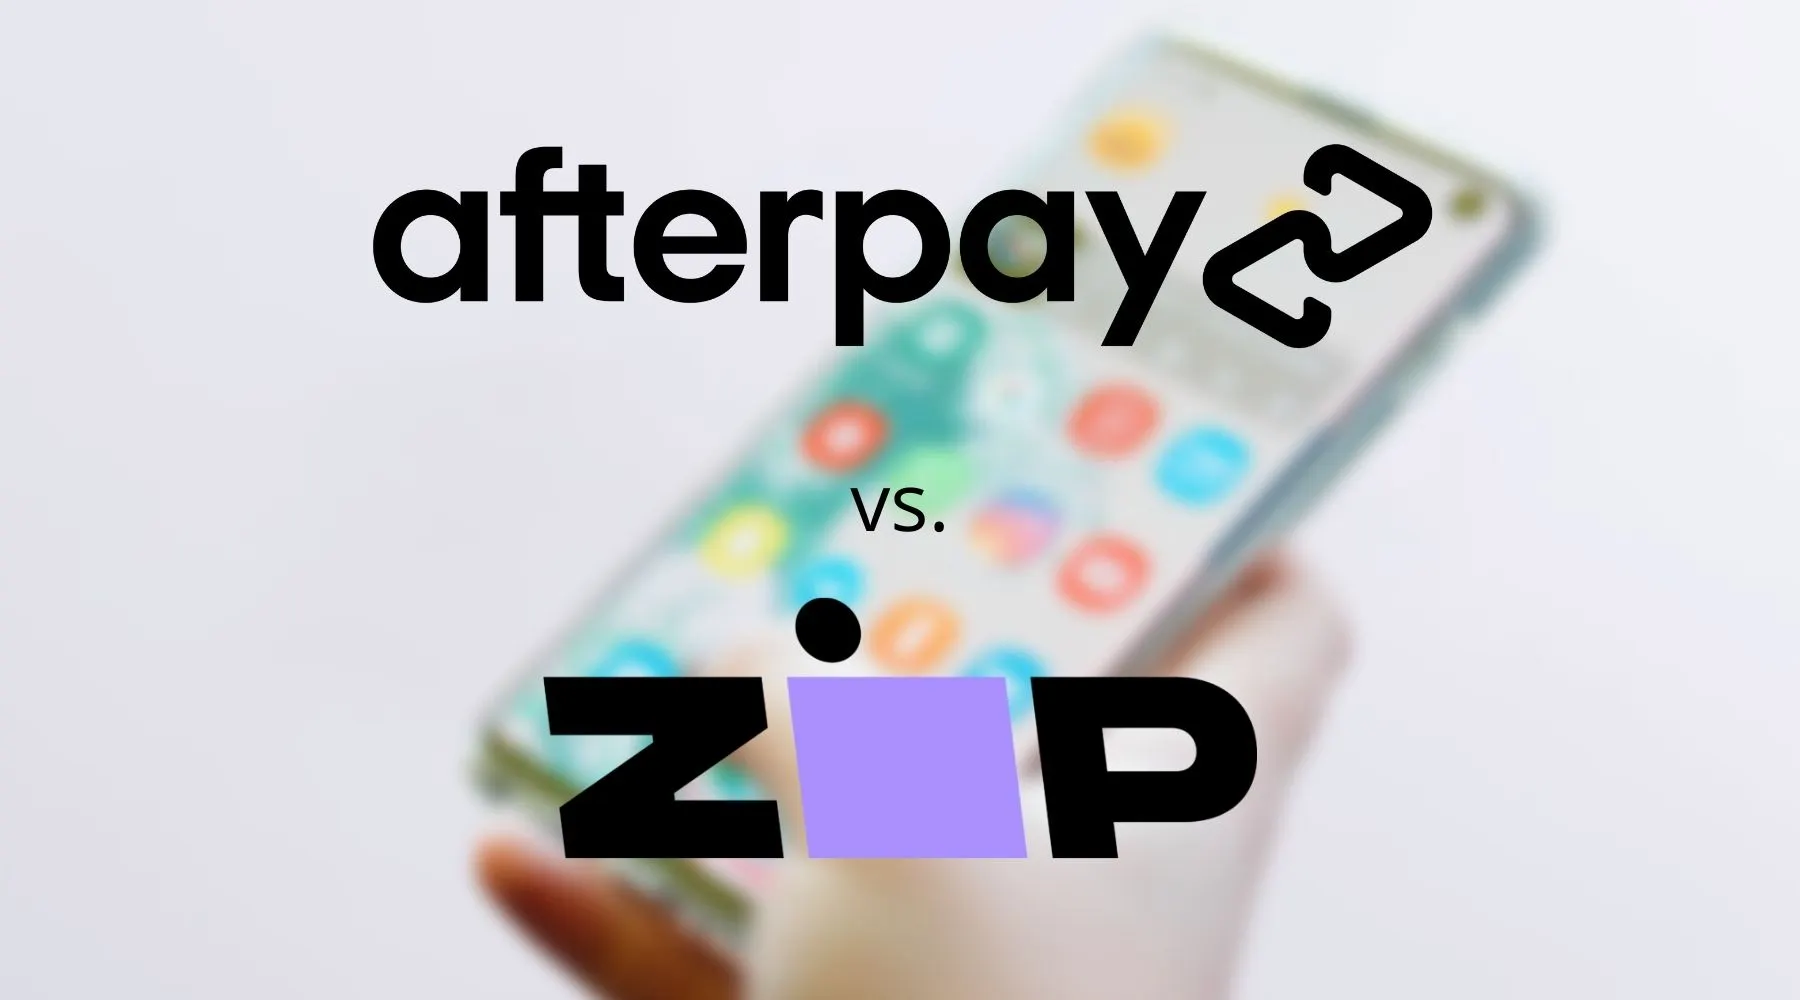 buy now pay later apps no money down